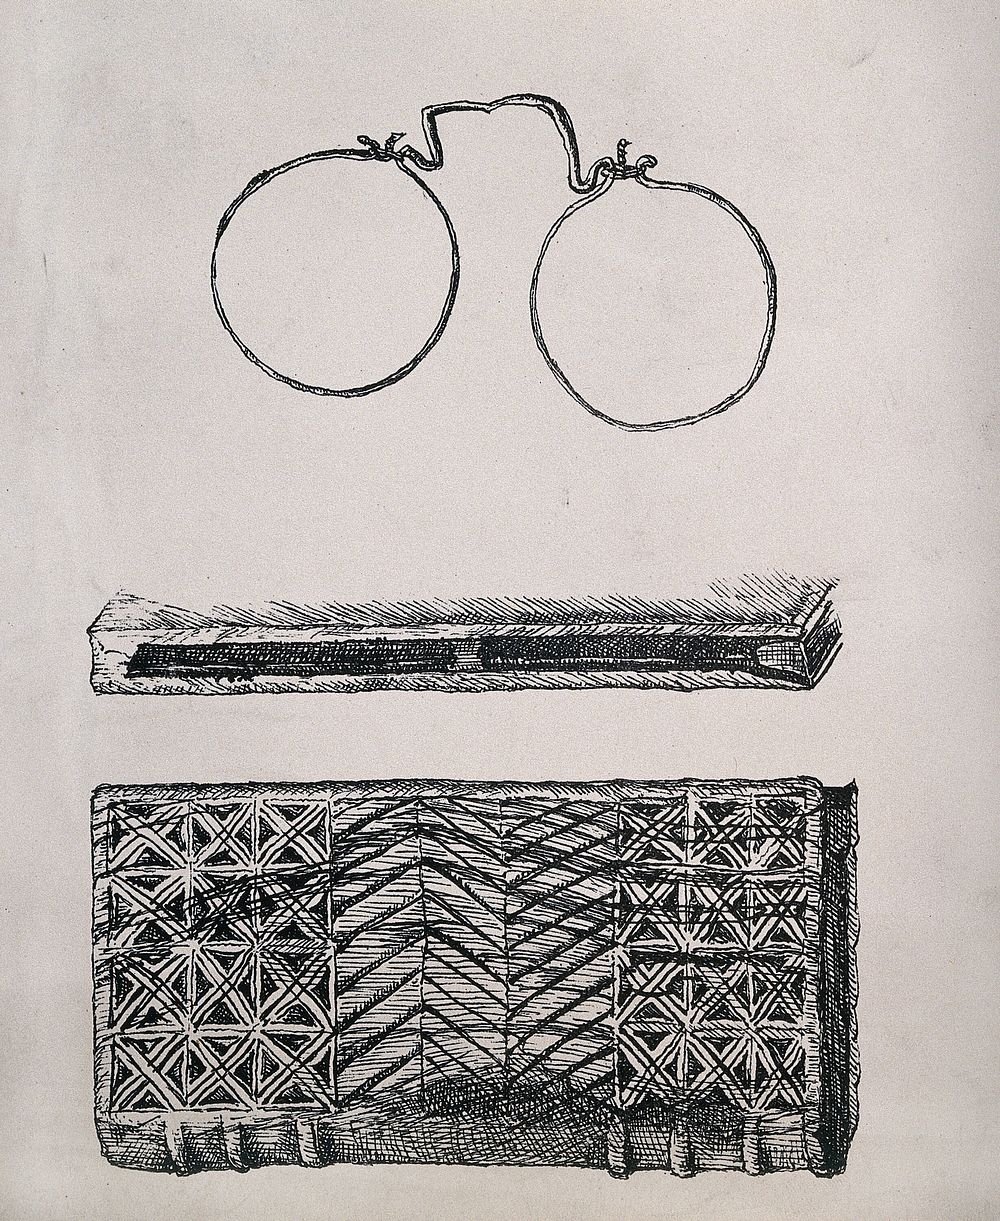 A pair of antique spectacles with their case. Transfer lithograph by C. Dims, 1877, after H. Strickland.